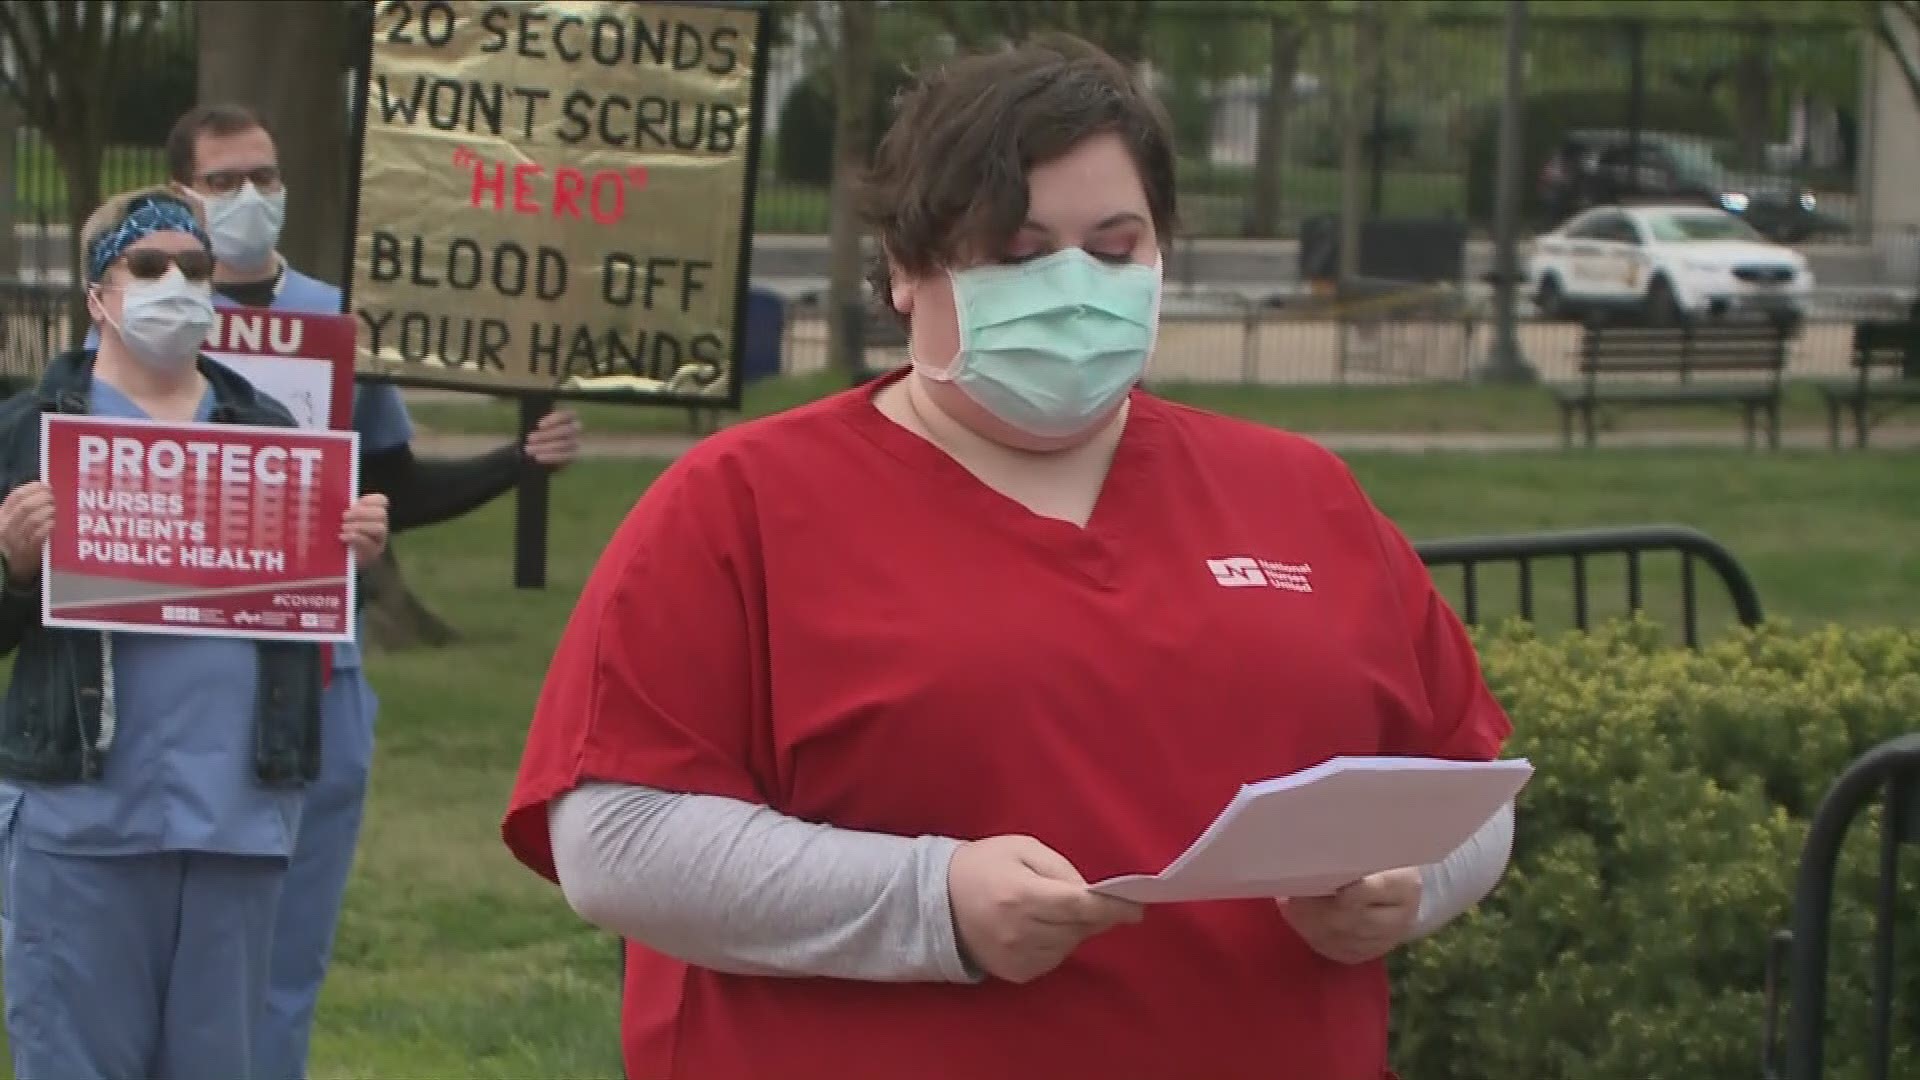 Members of National Nurses United protested outside of the White House on Tuesday morning demanding more PPE and OSHA standards to protect health care workers.